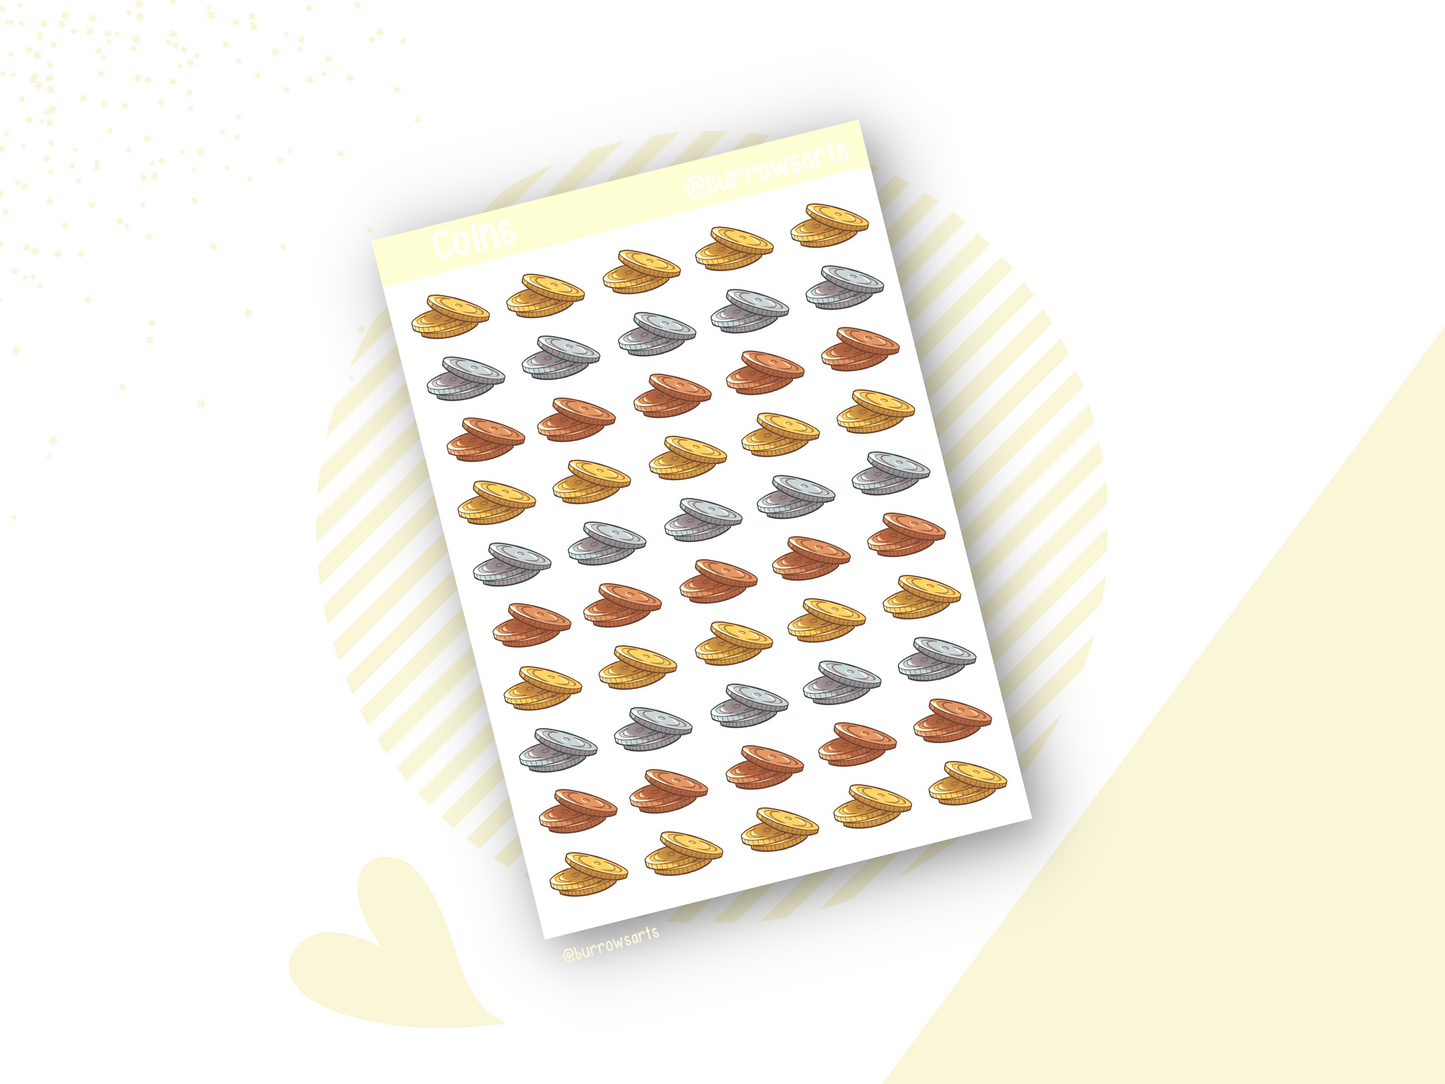 Copper, Silver and Gold Coins - Sticker Sheet